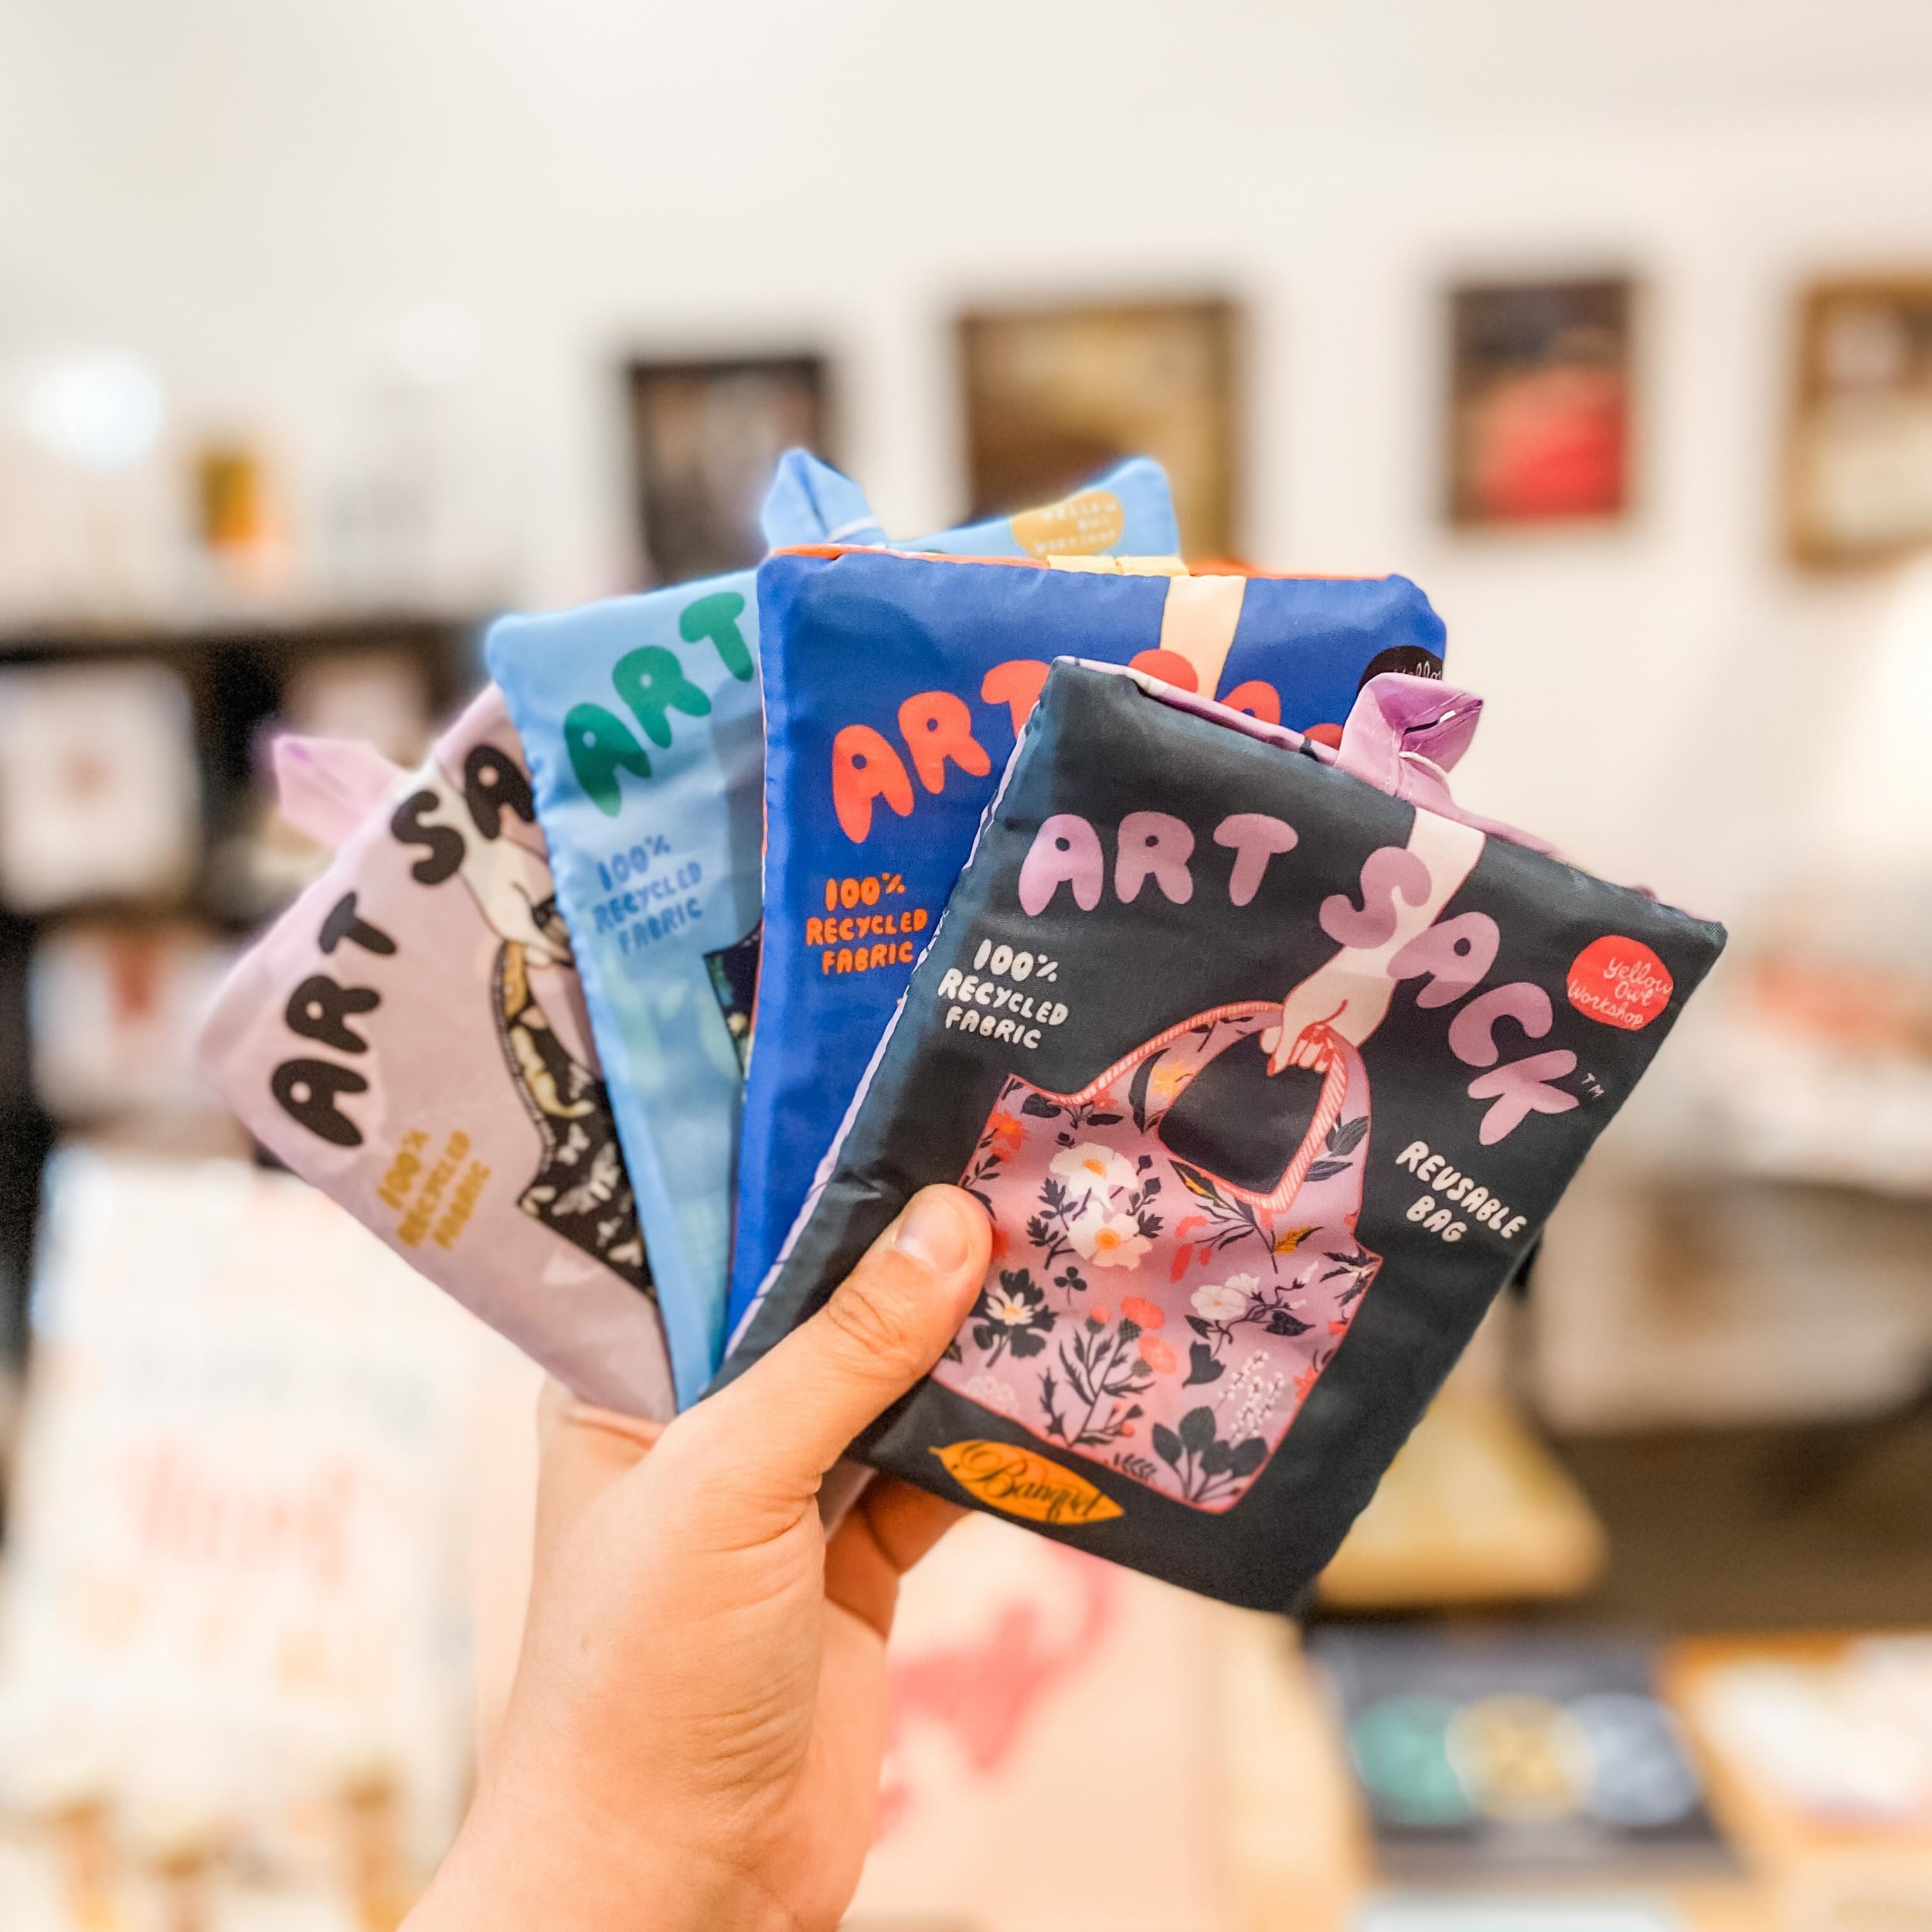 Art Sacks are back! 🙌 These super convenient reusable bags feature artwork from a dozen designers and they are sure to make your shlepping so much more fun. Perfect for groceries, markets, the pool or beach, gifting, etc!

🌞 Open 10-6 today

##Live